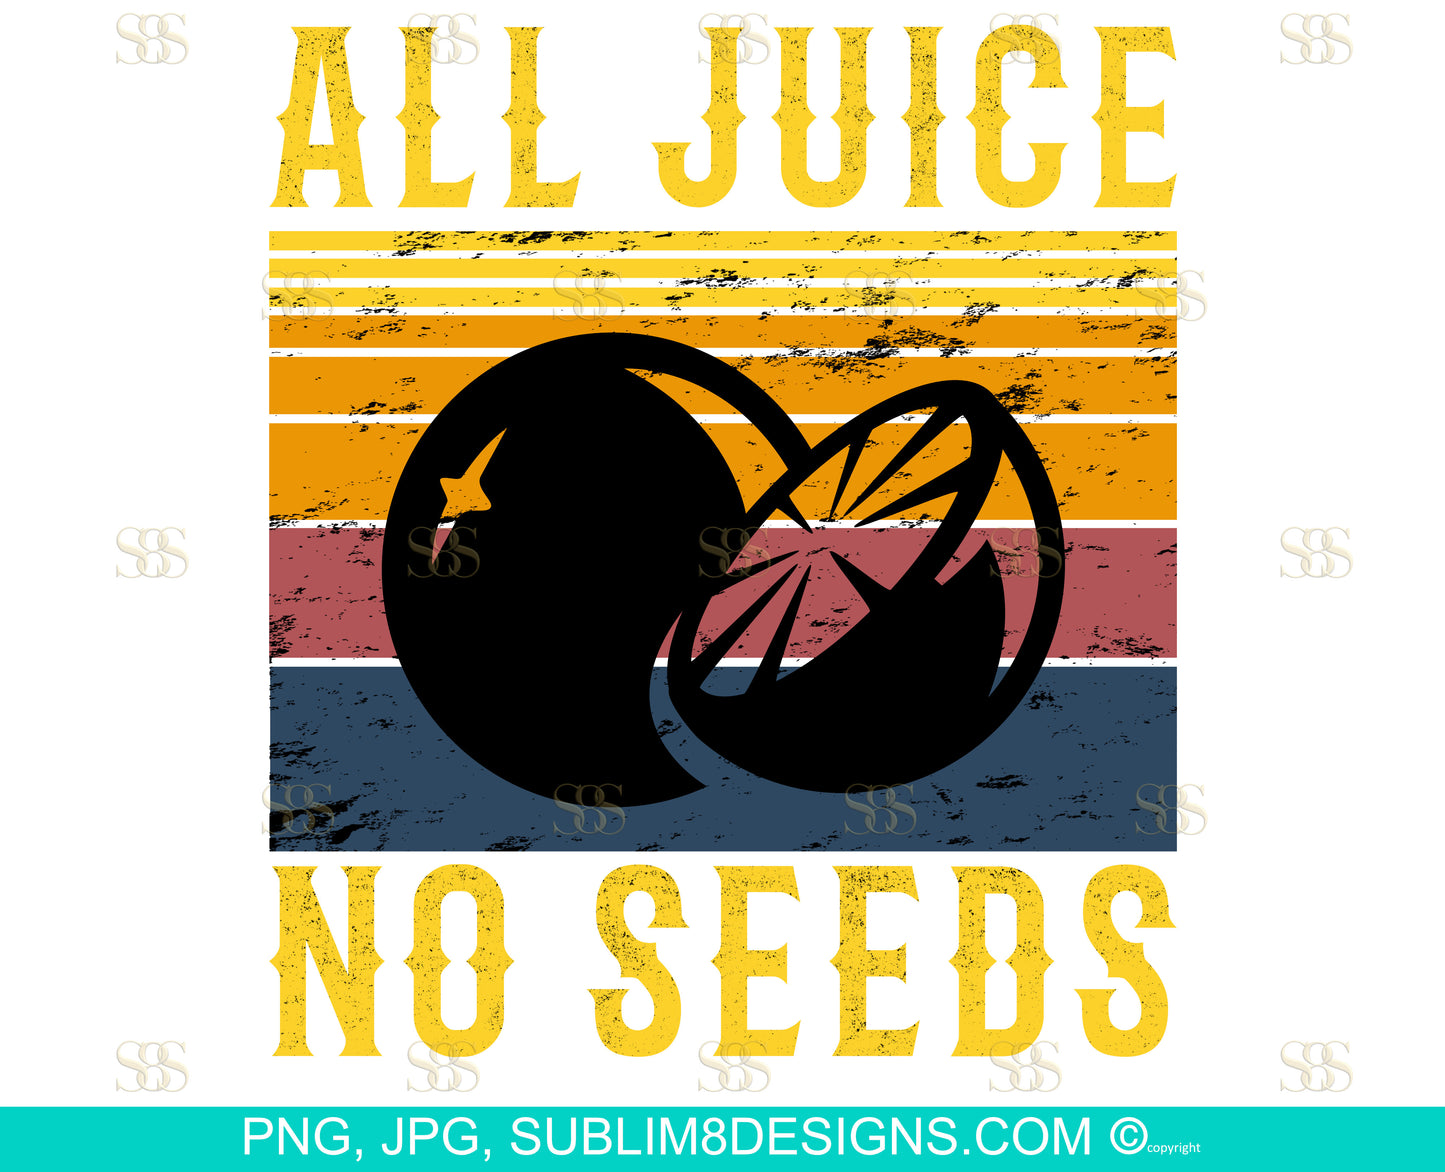 All Juice No Seed